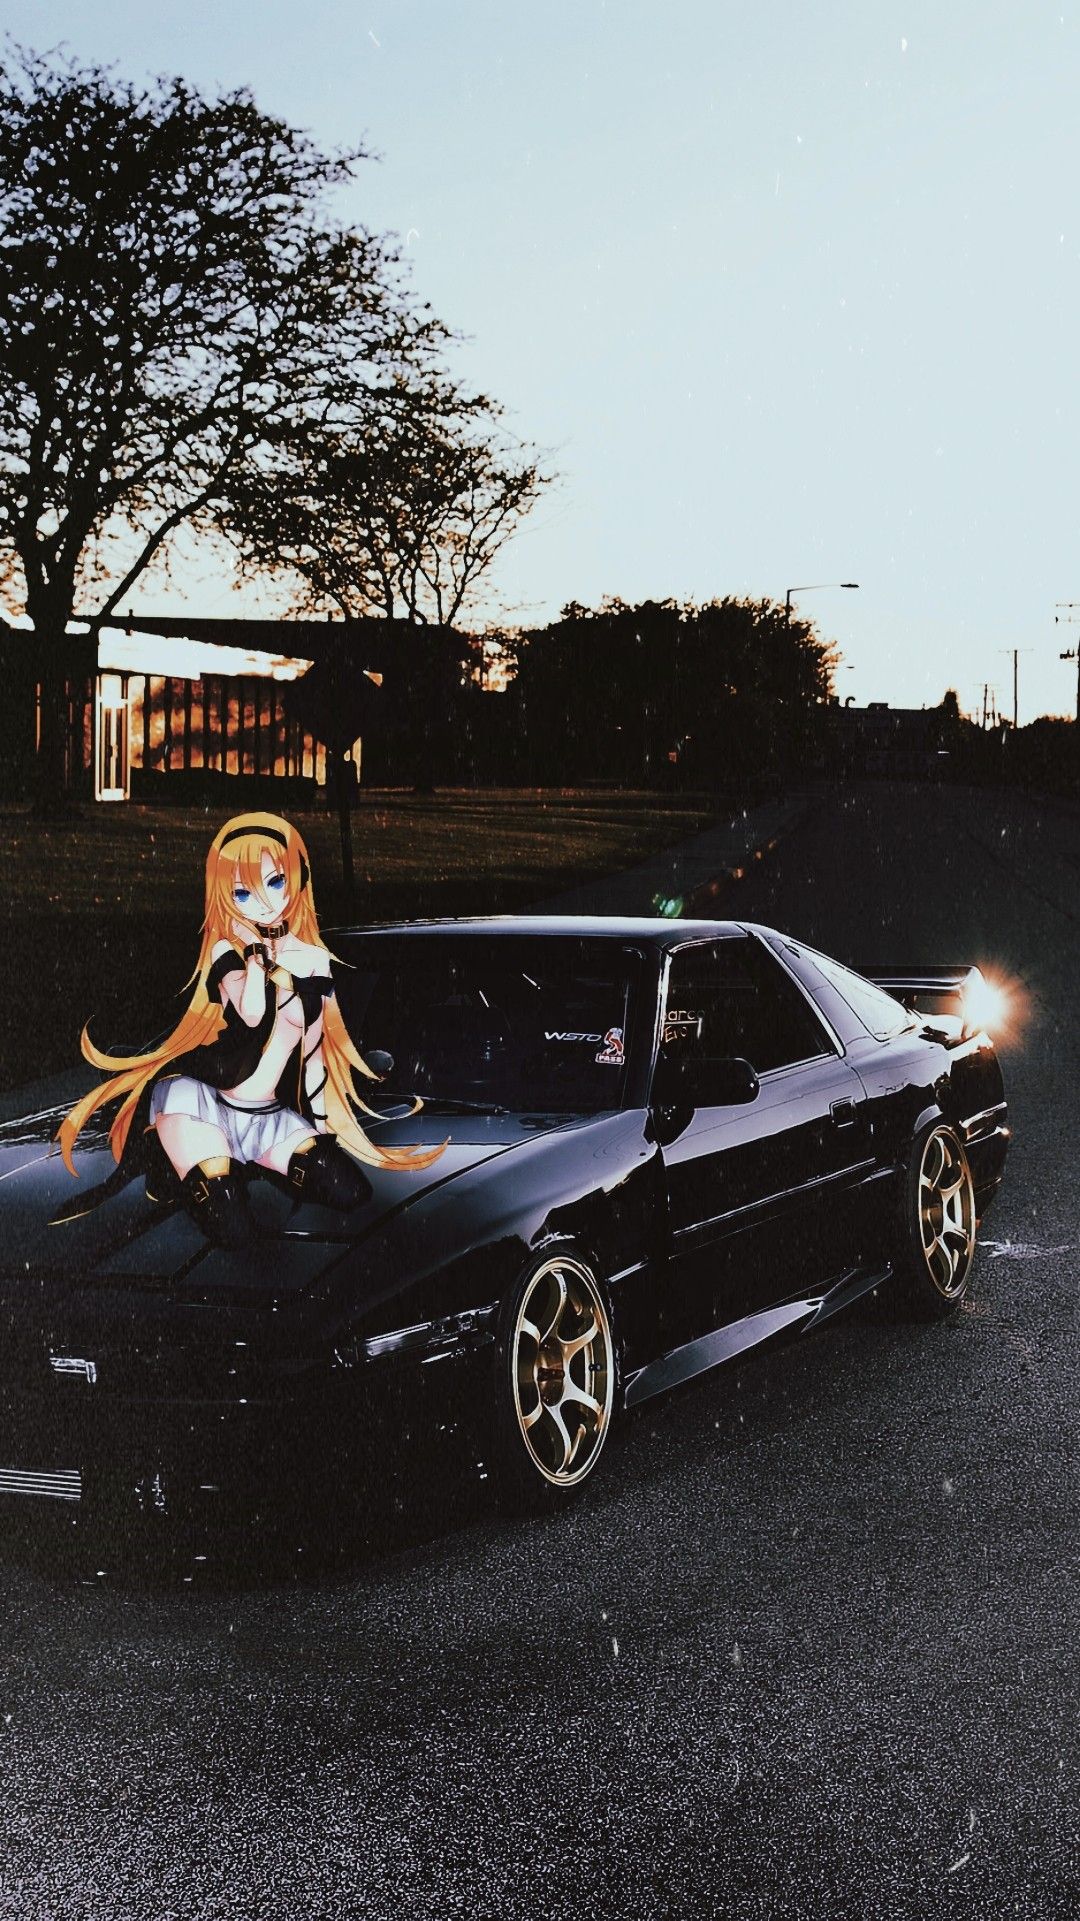 girl car. Cool anime wallpaper, Android wallpaper anime, Anime background wallpaper